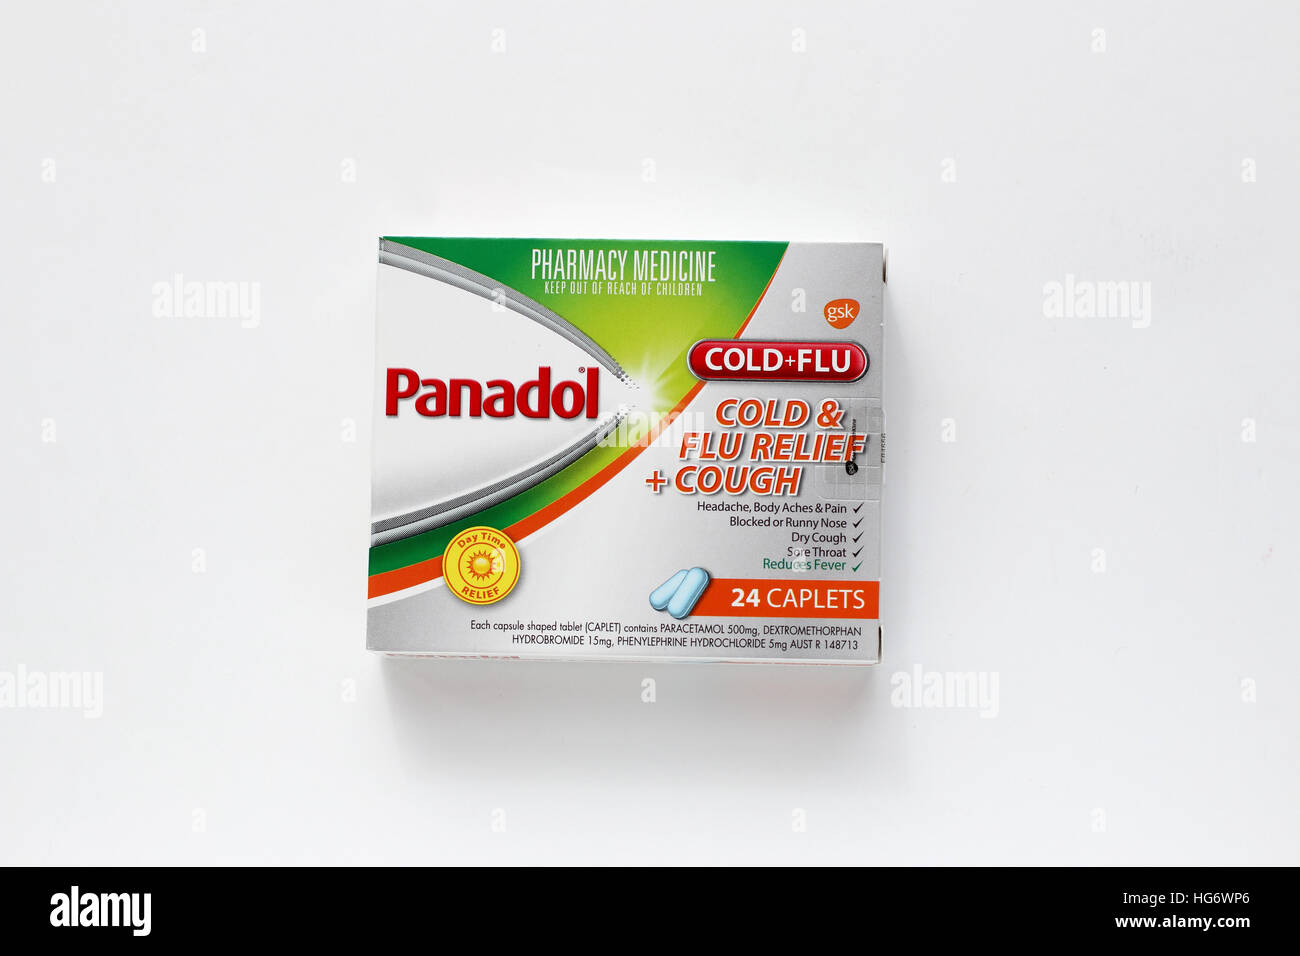 Panadol Cold and Flu and cough relief tablets in a box isolated against white background - stock photo (NOT ACTUAL TABLETS) Stock Photo